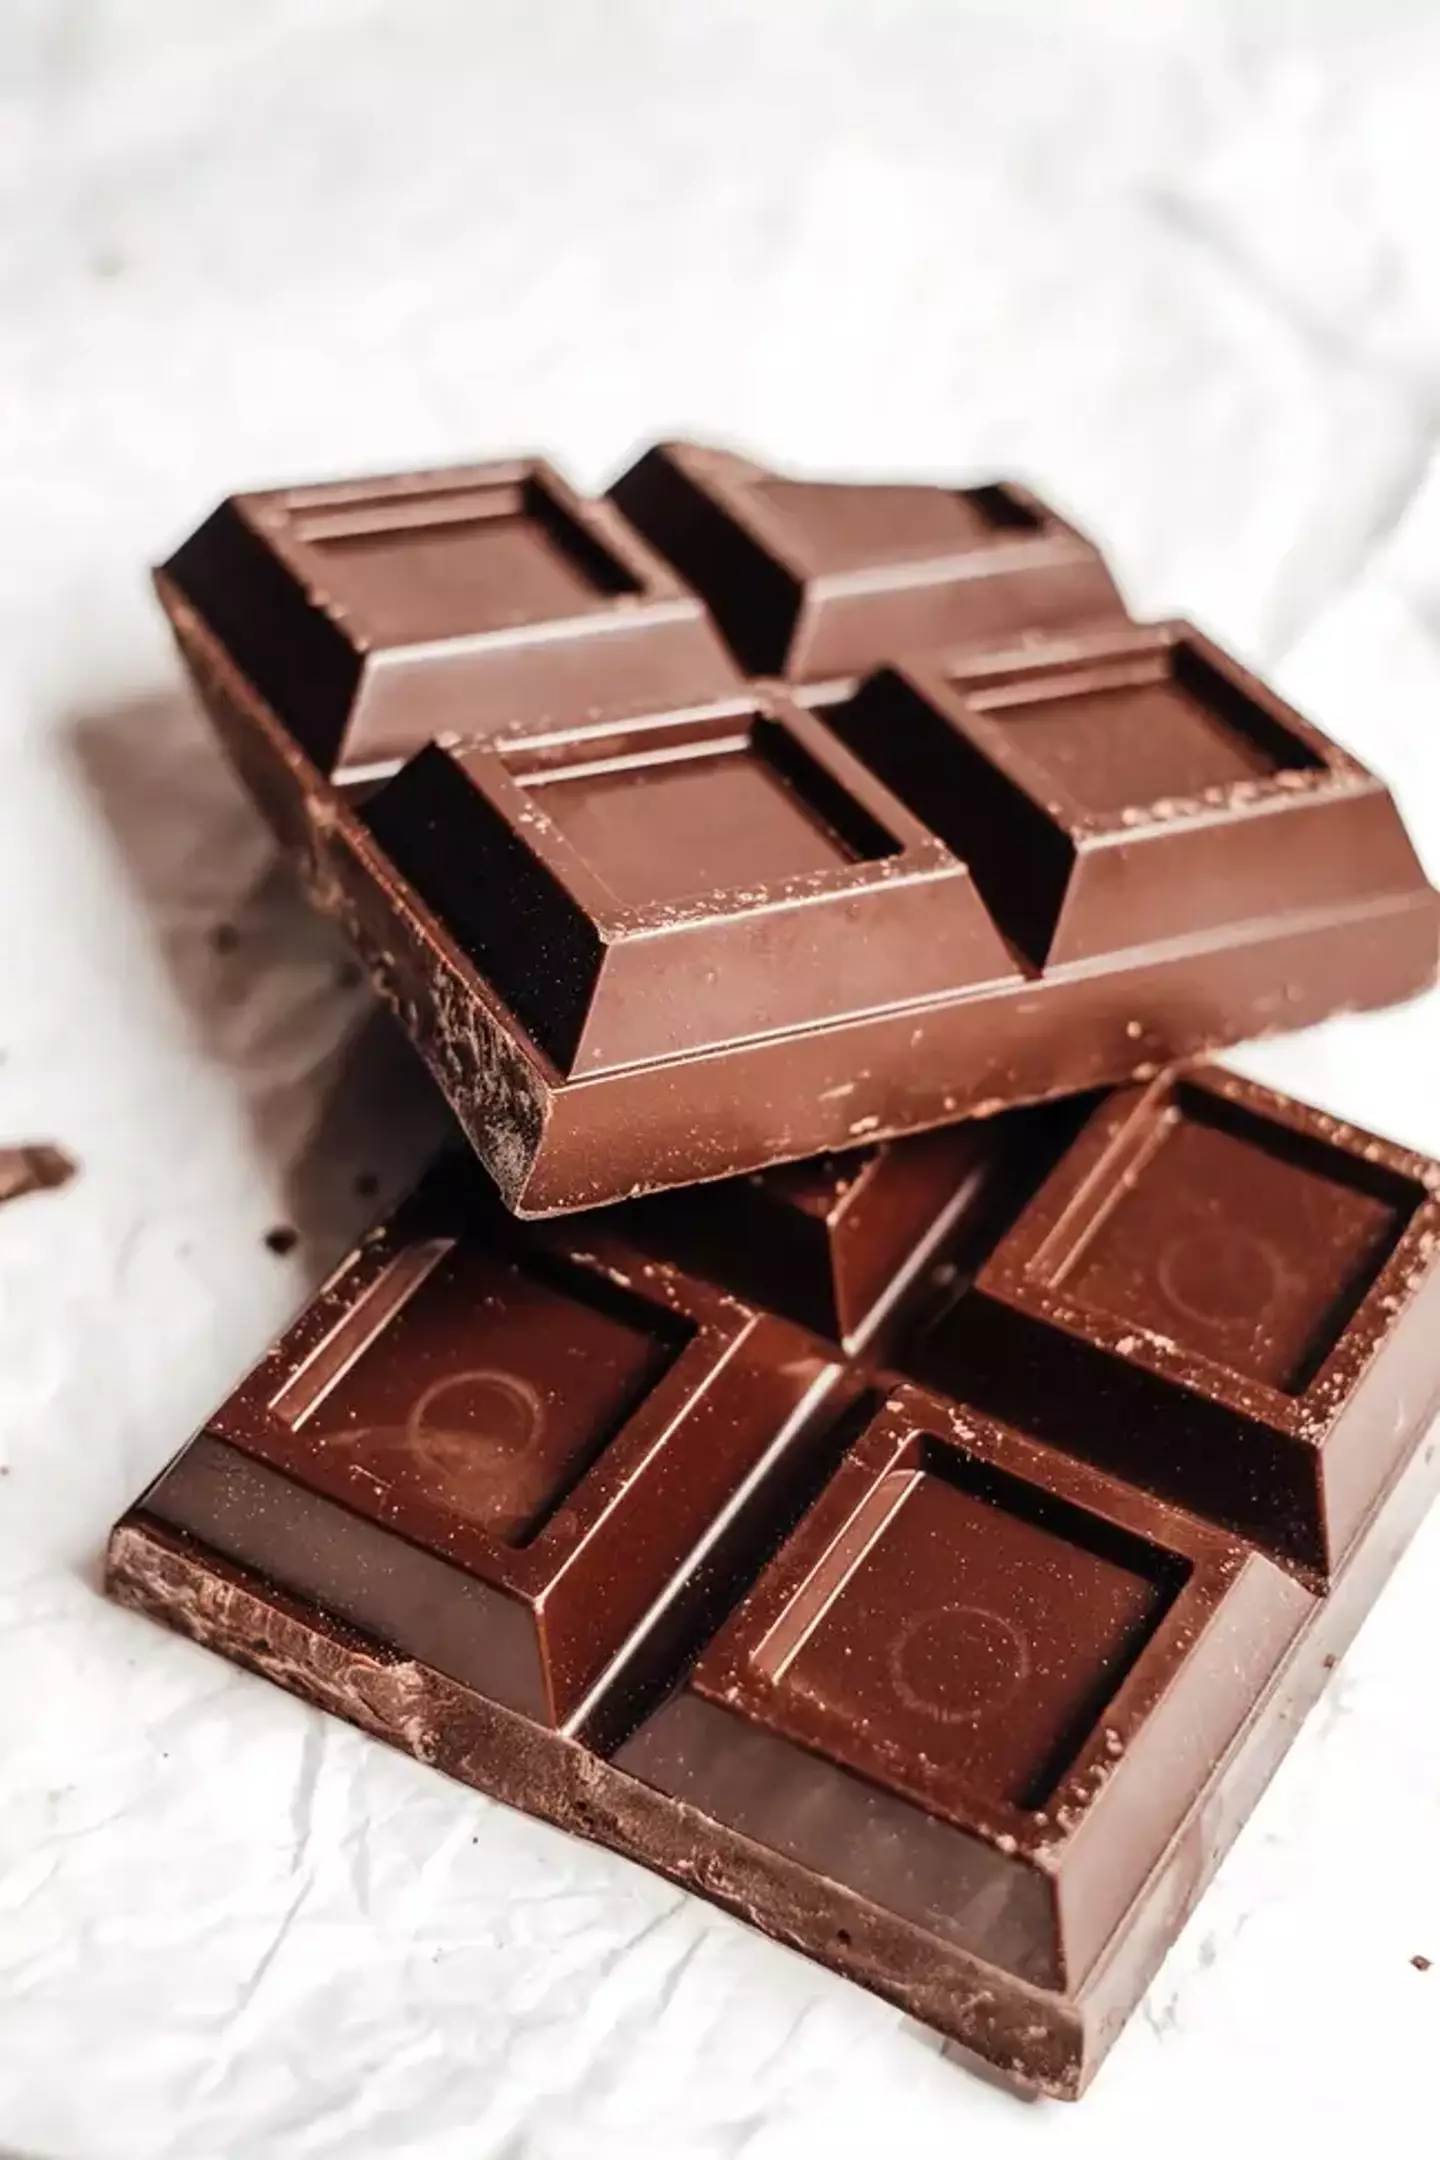 Believe it or not, a study has found that eating chocolate in the morning can actually help burn body fat.